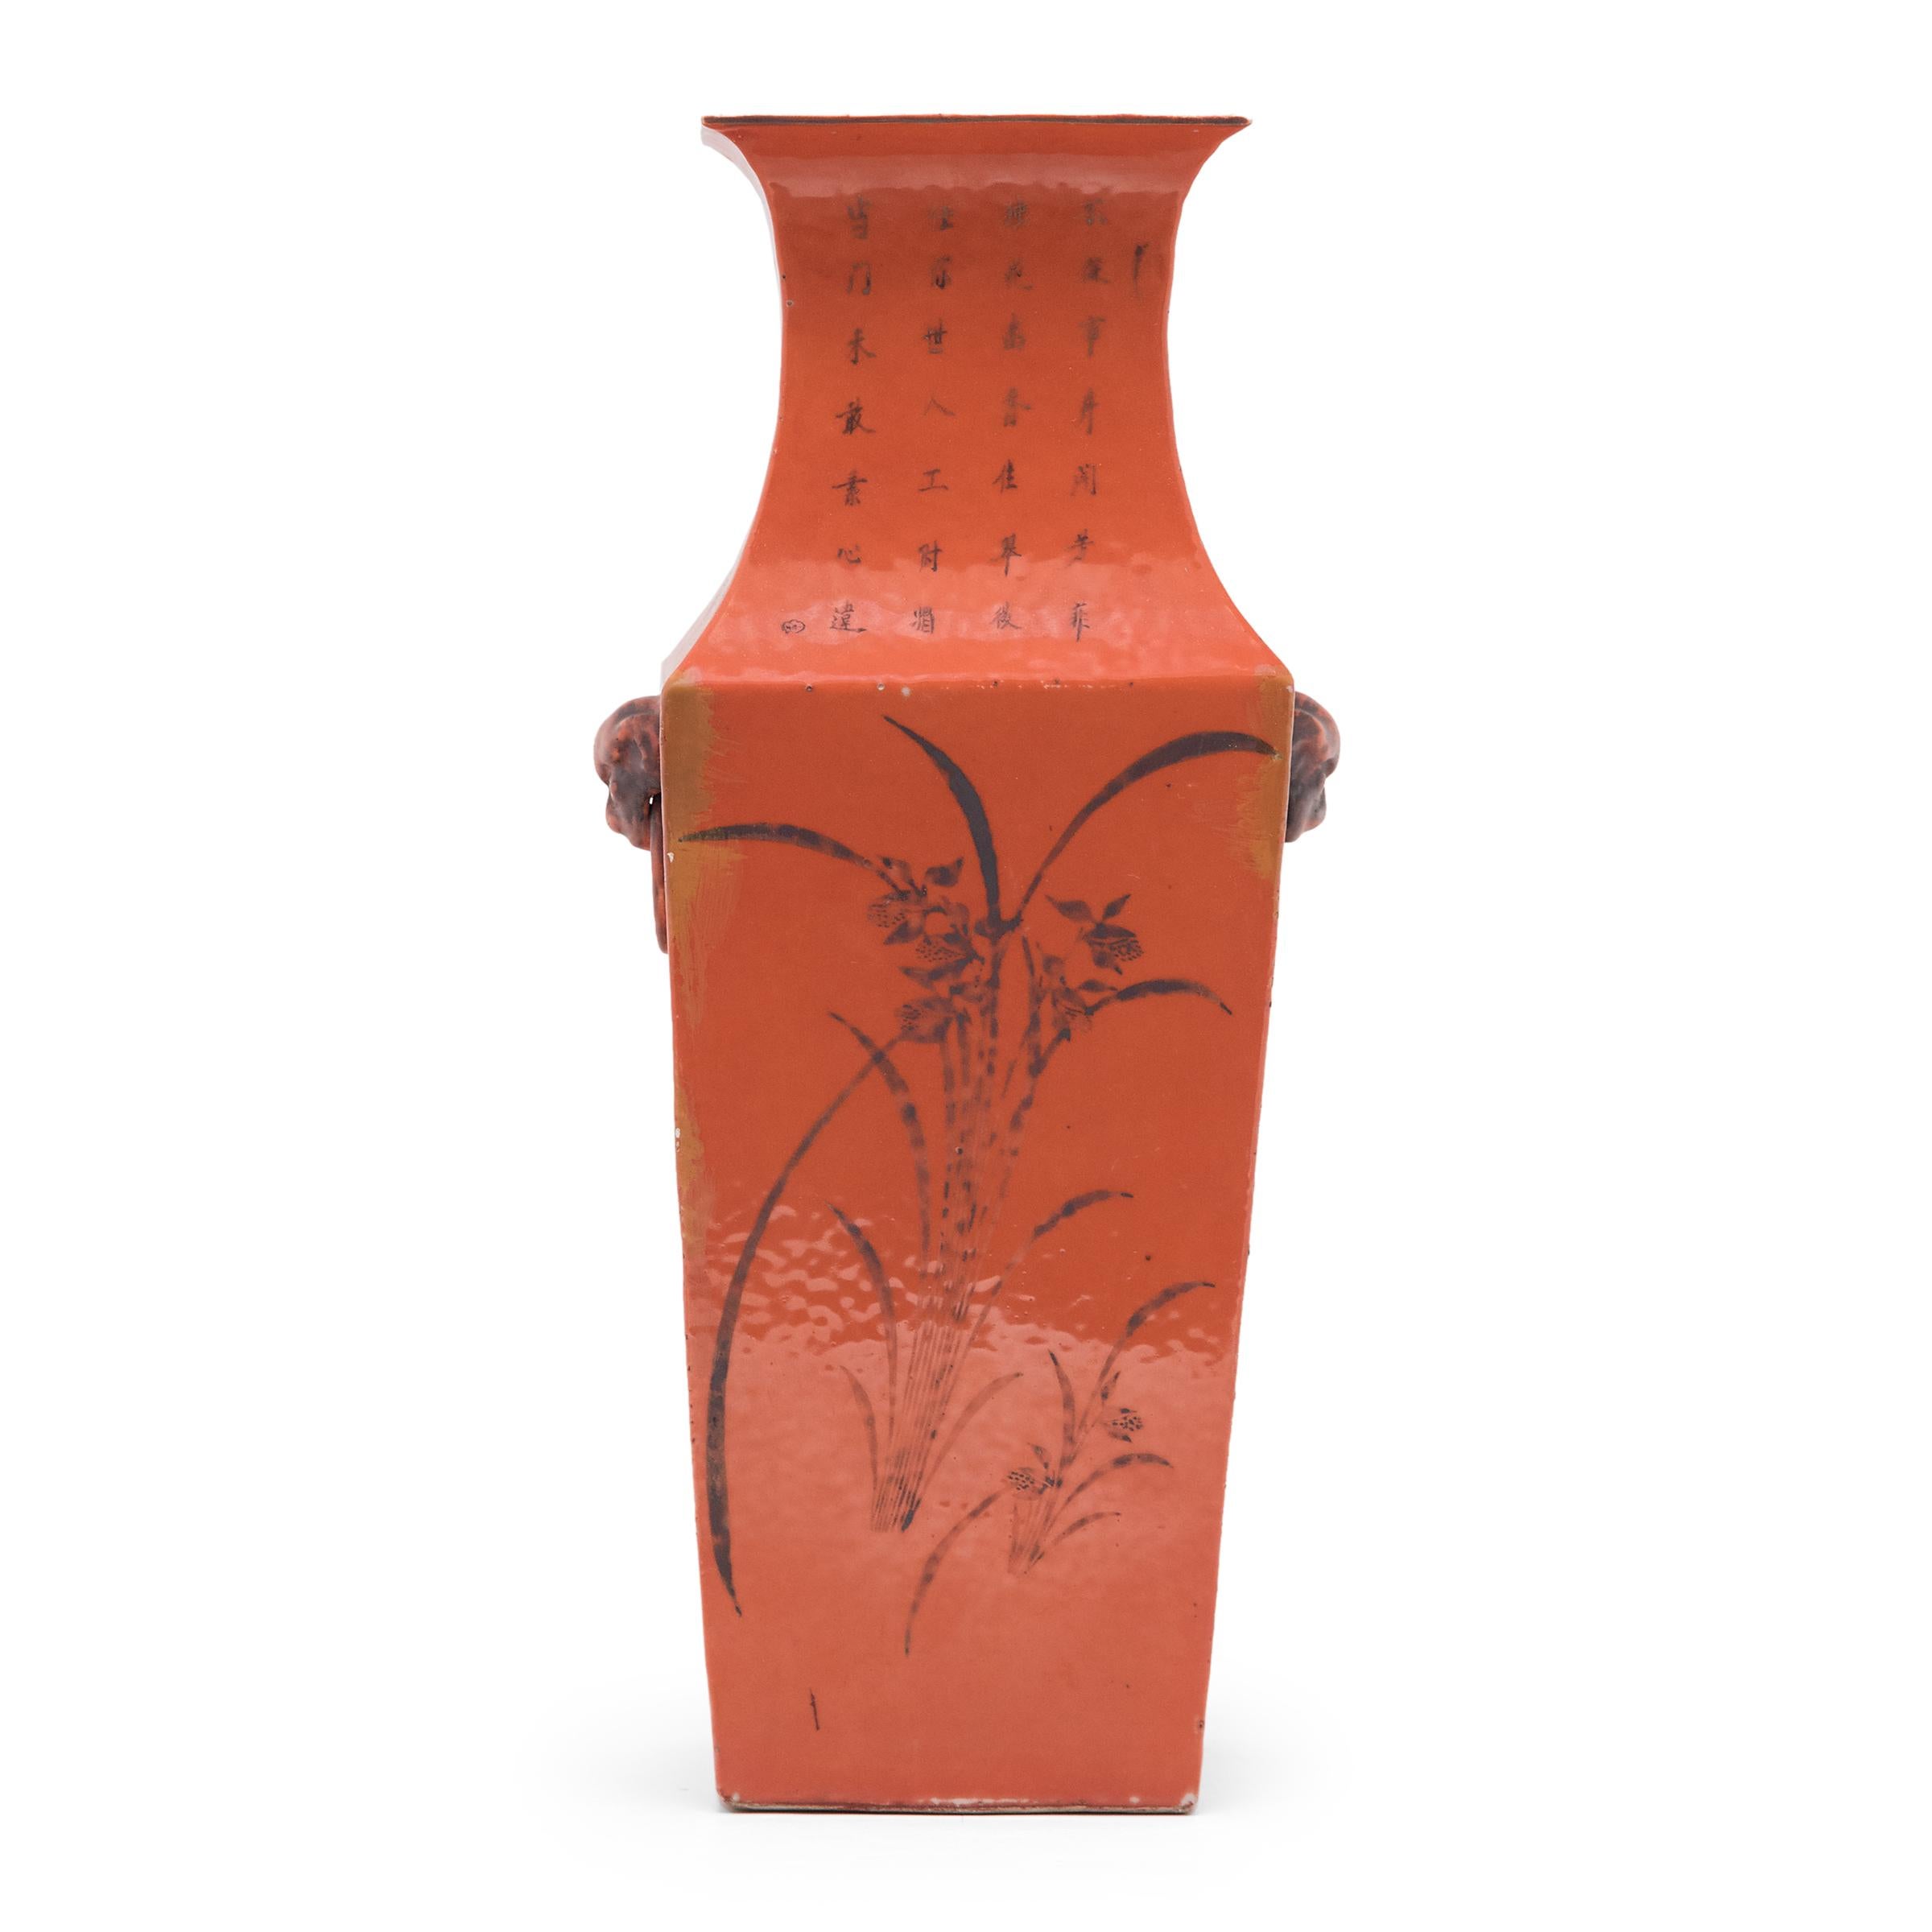 With bright color and sculptural form, this squared vase combines the centuries-old phoenix tail vase form with a rich persimmon-orange glaze, popularized during the Art Deco movement of the early 20th century. The vase is decorated on all sides